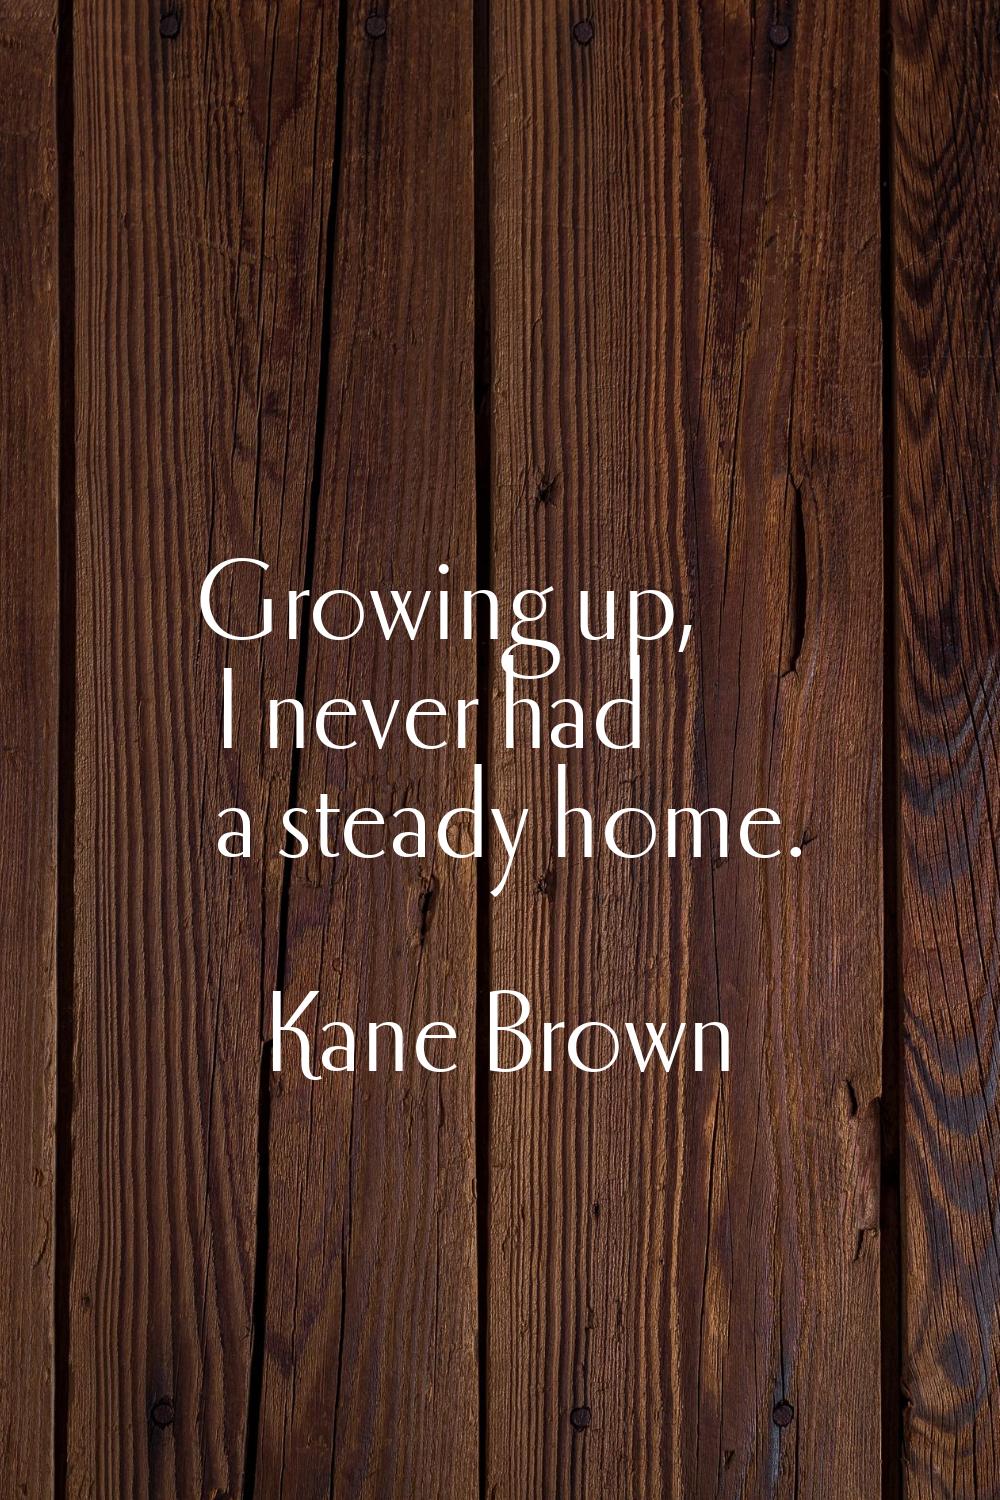 Growing up, I never had a steady home.